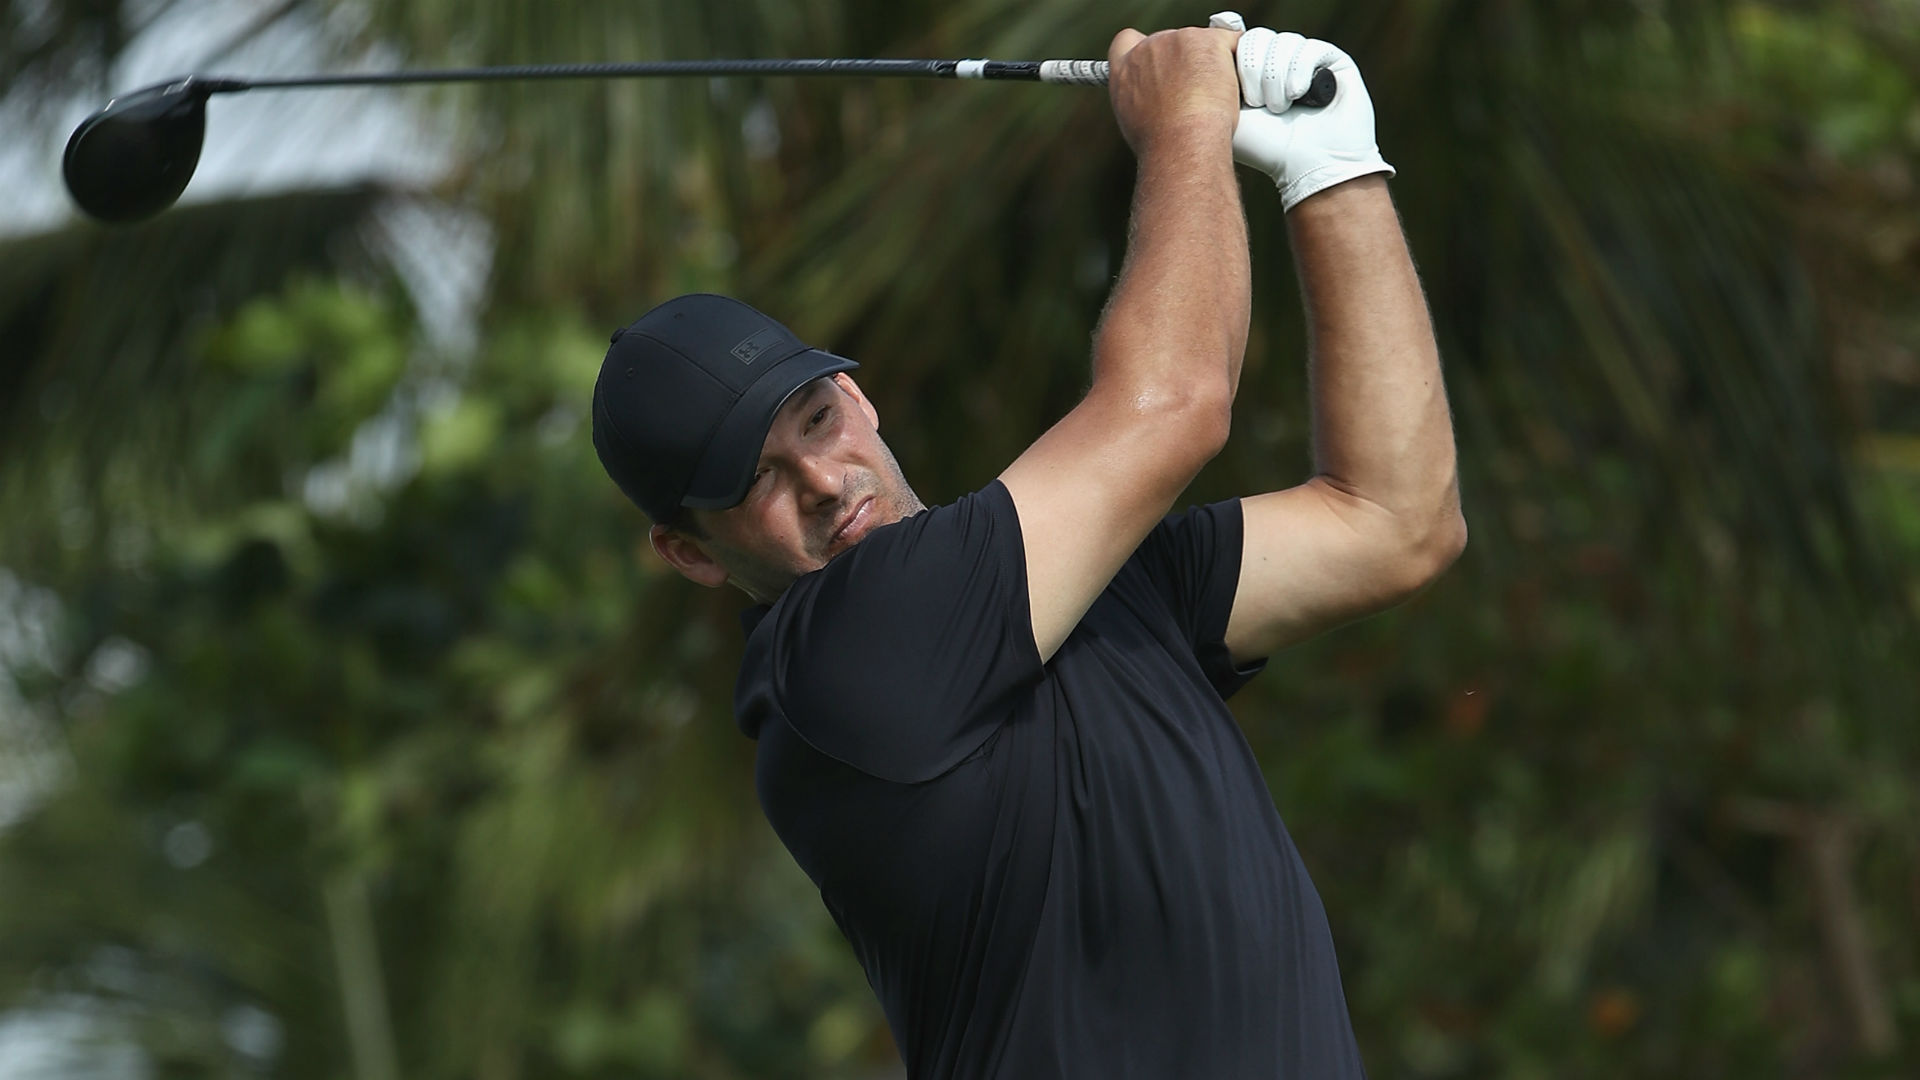 The 38-year-old NFL great held off ex-St Louis Cardinals pitcher Mark Mulder by three points to win the celebrity tournament at Lake Tahoe.